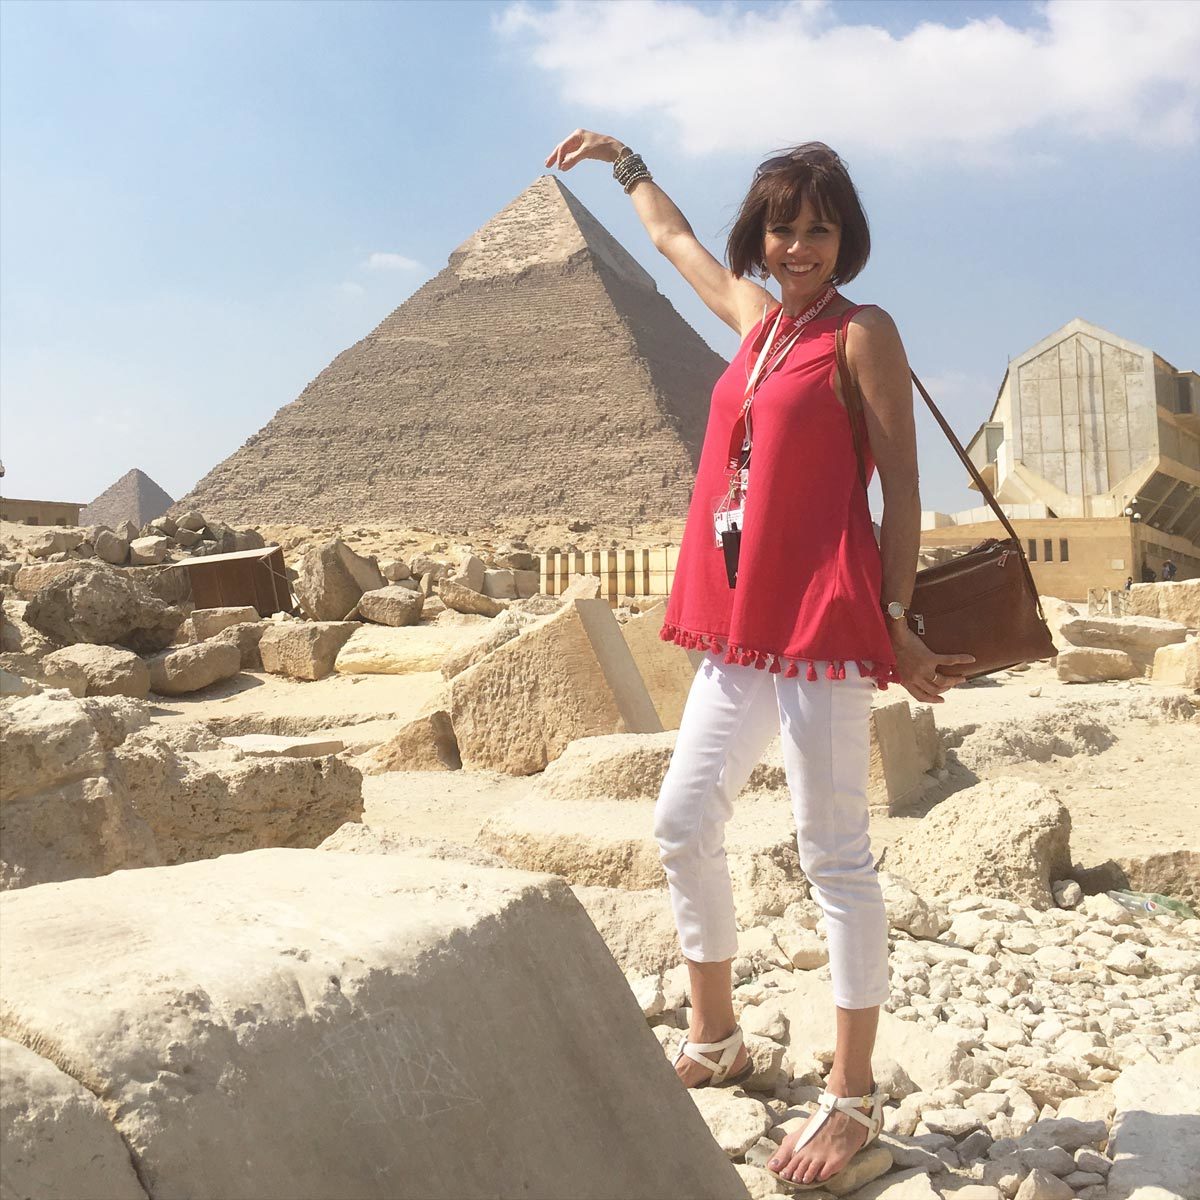 Bronwyn Spilsbury at the Pyramids in Egypt